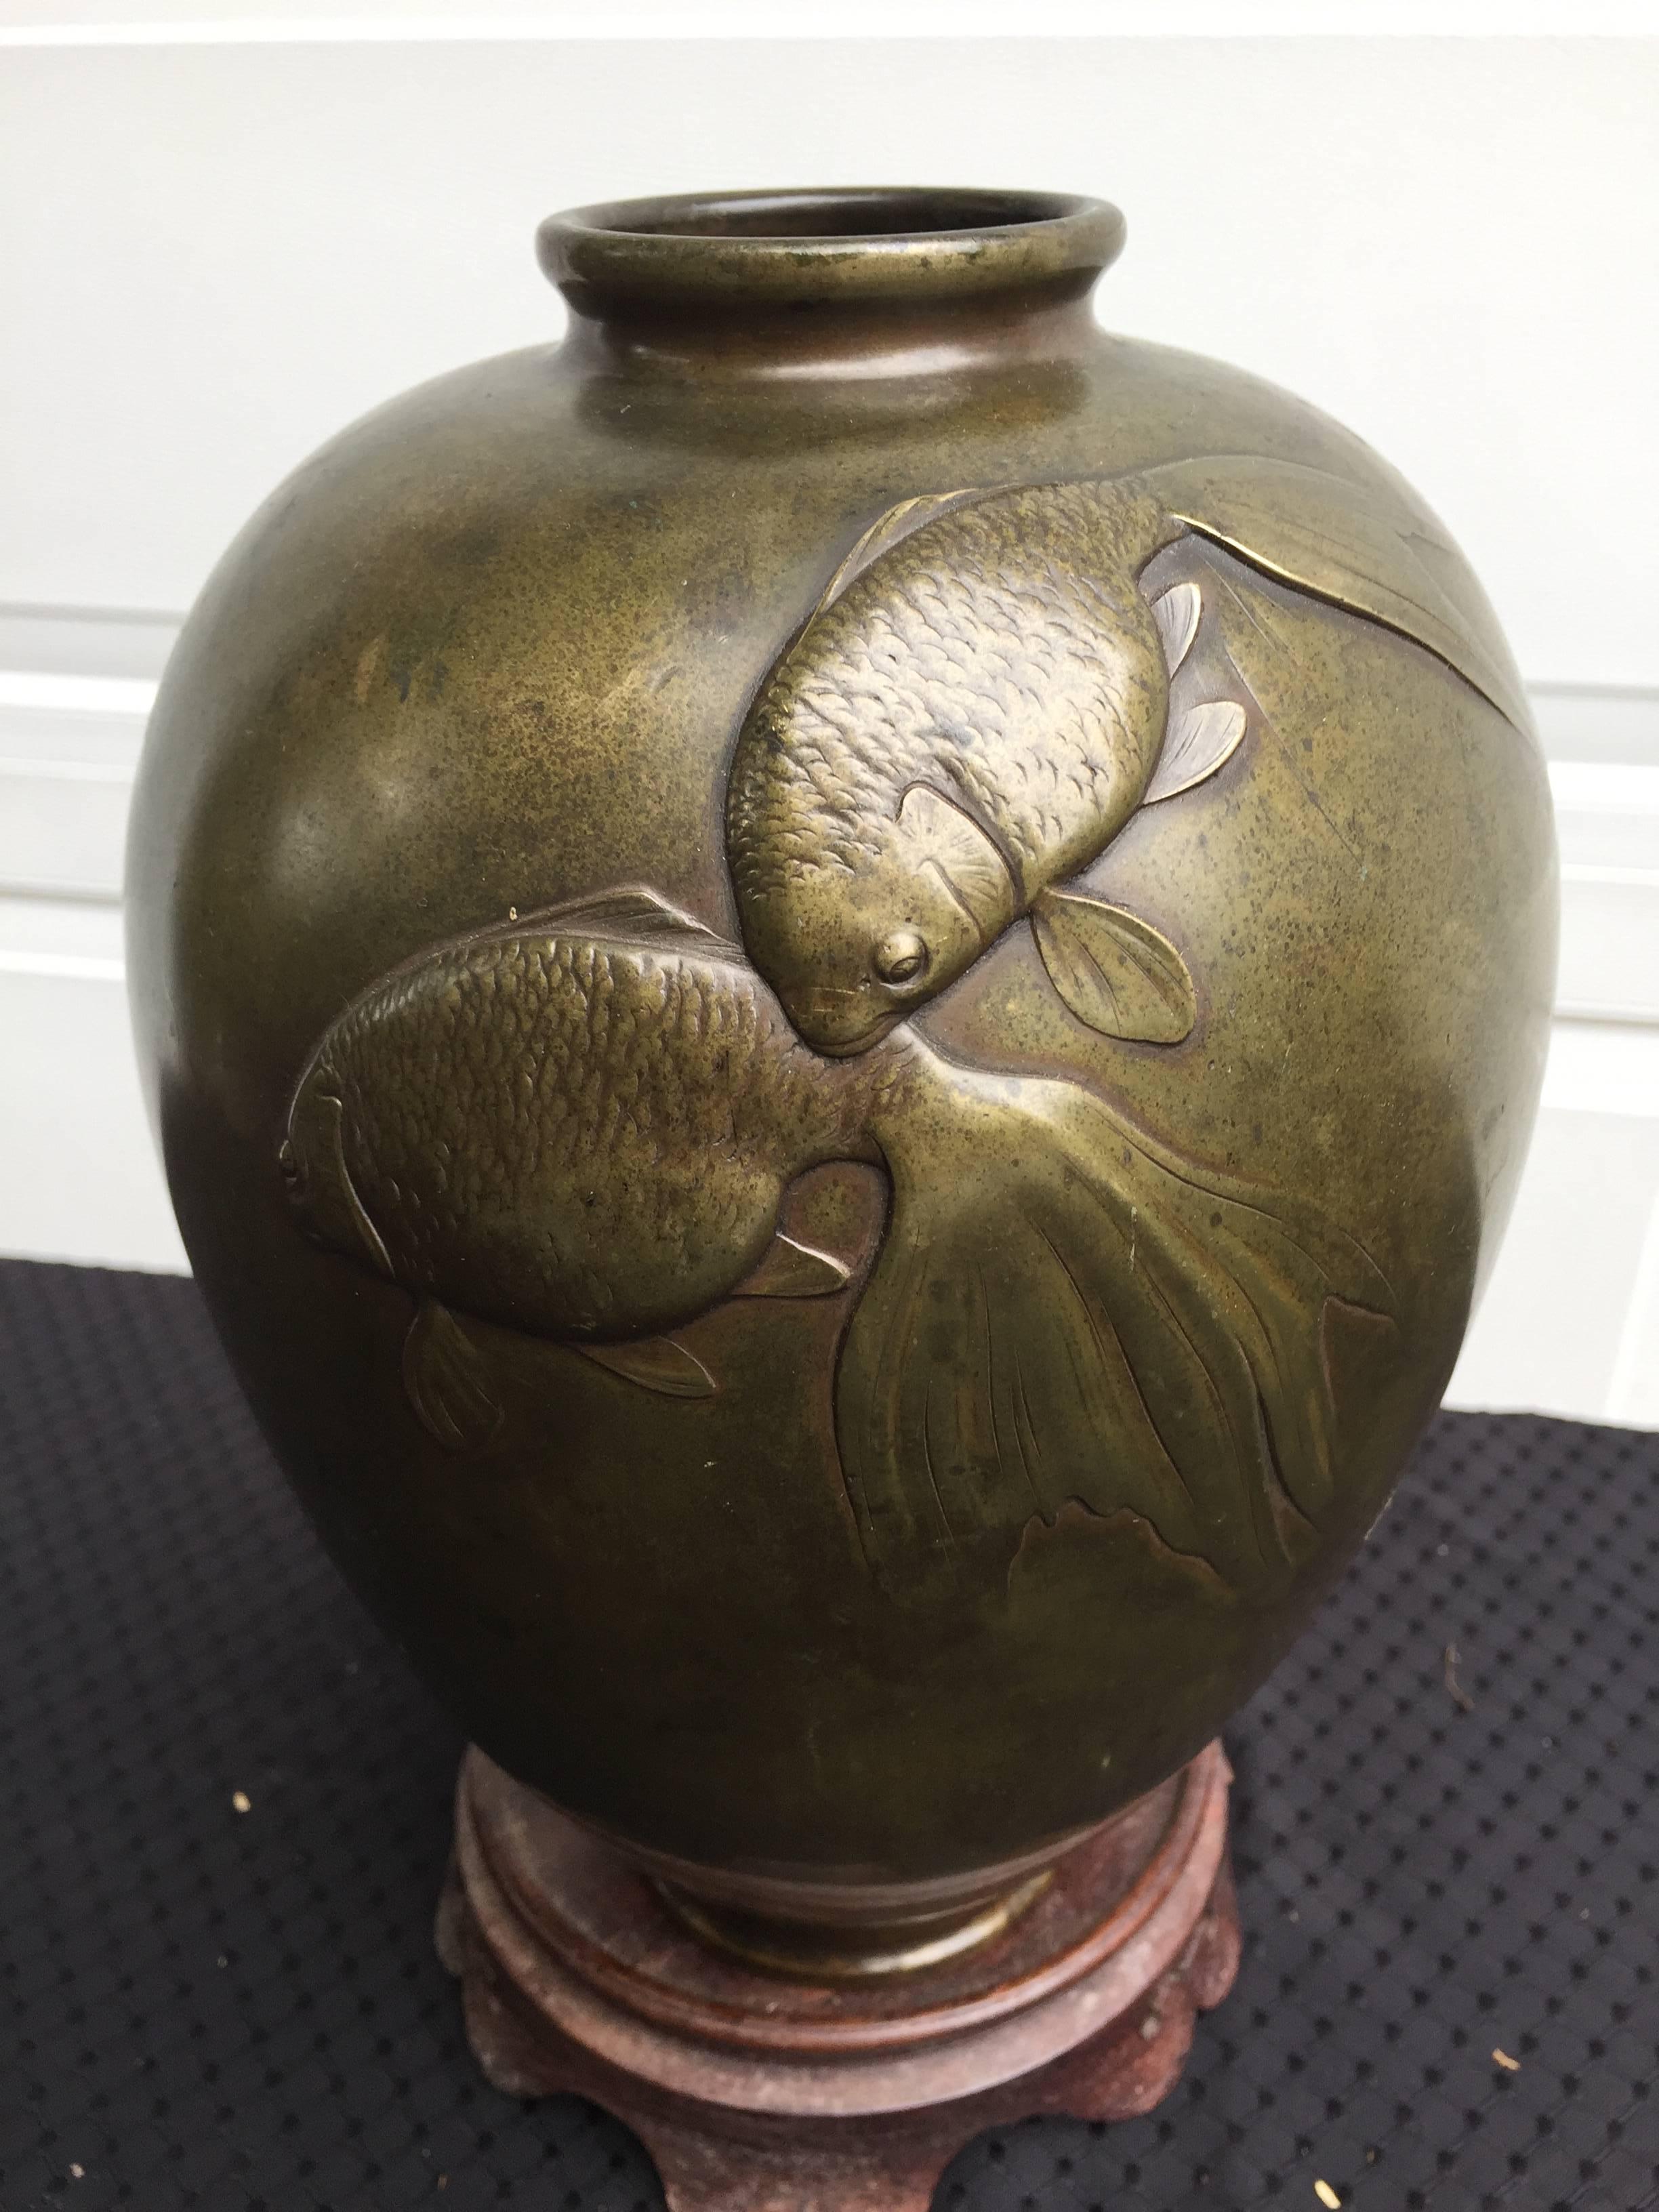 Japan, a beautiful cast 1930s period bronze vase with a fine image of 